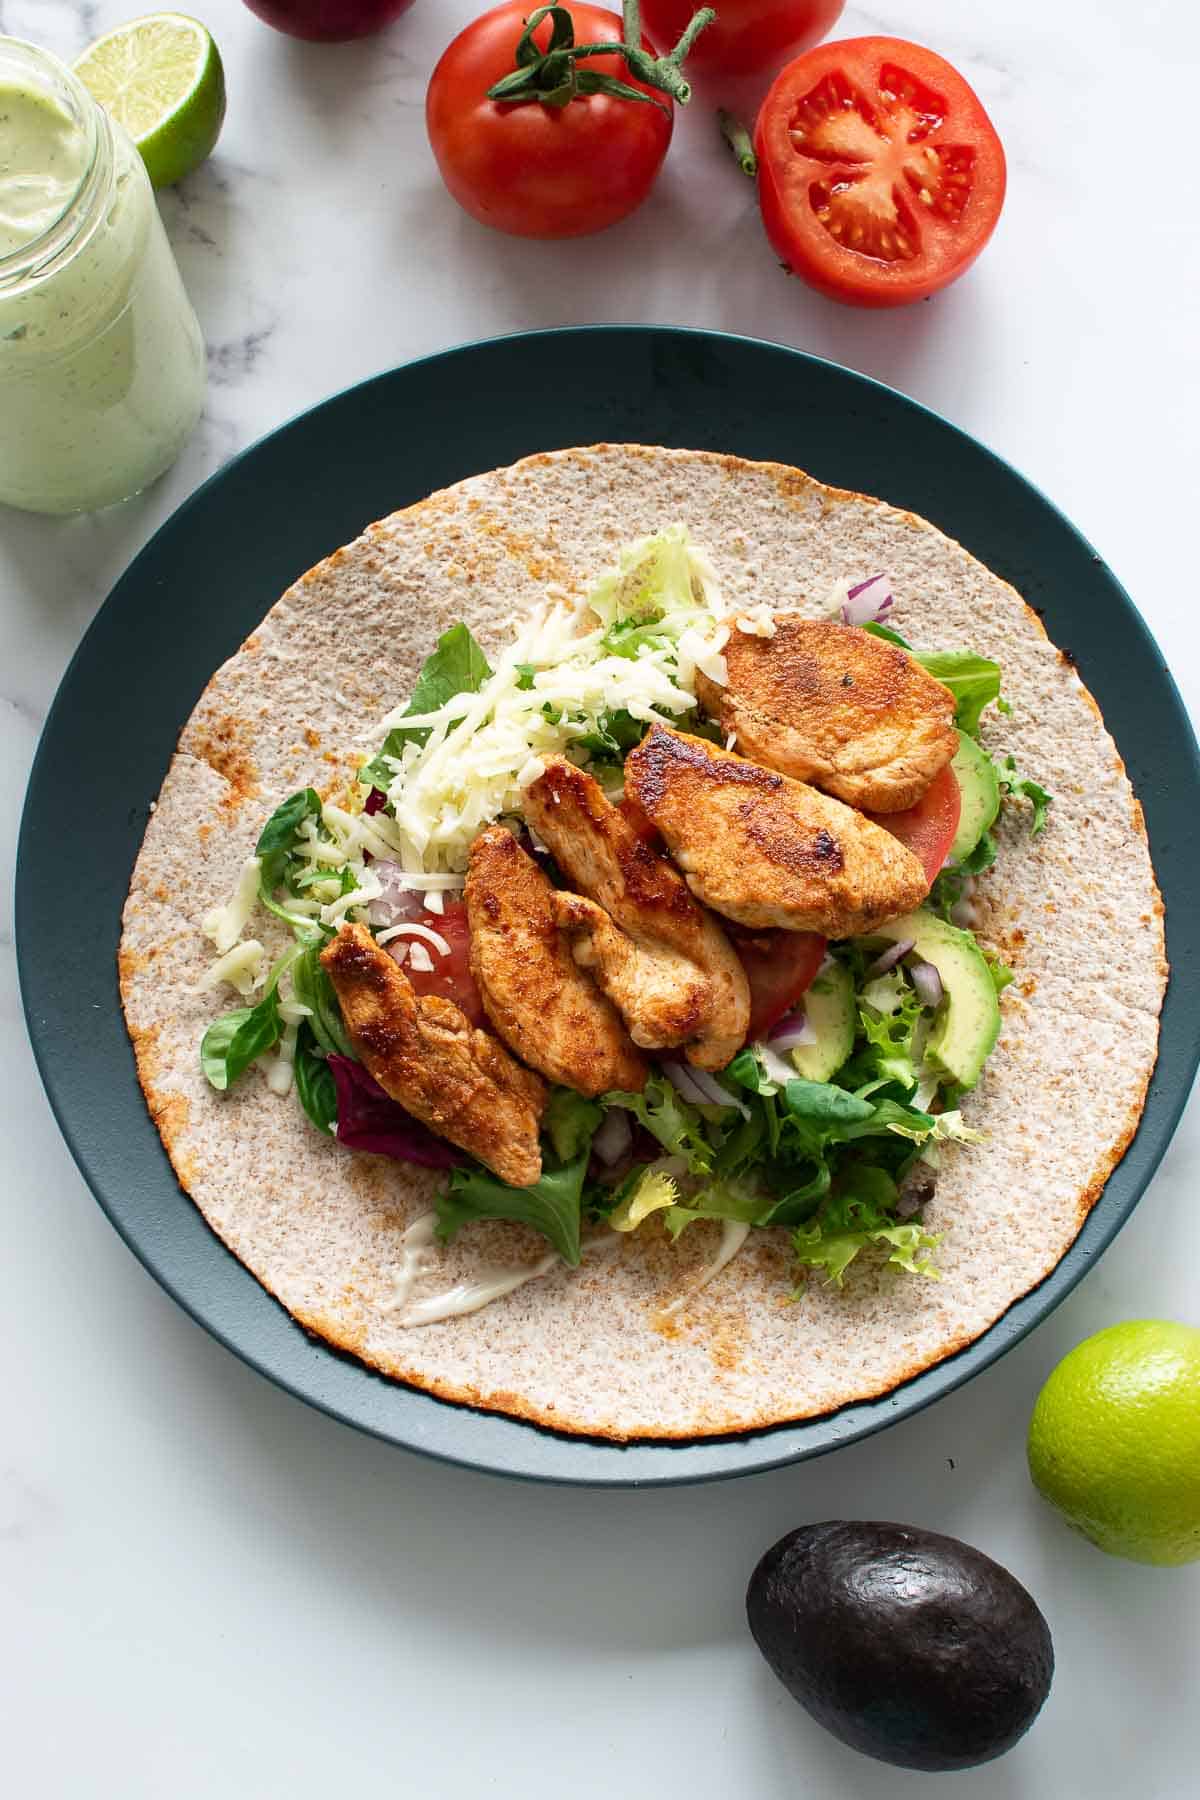 Wraps with avocado, chicken and tomato.